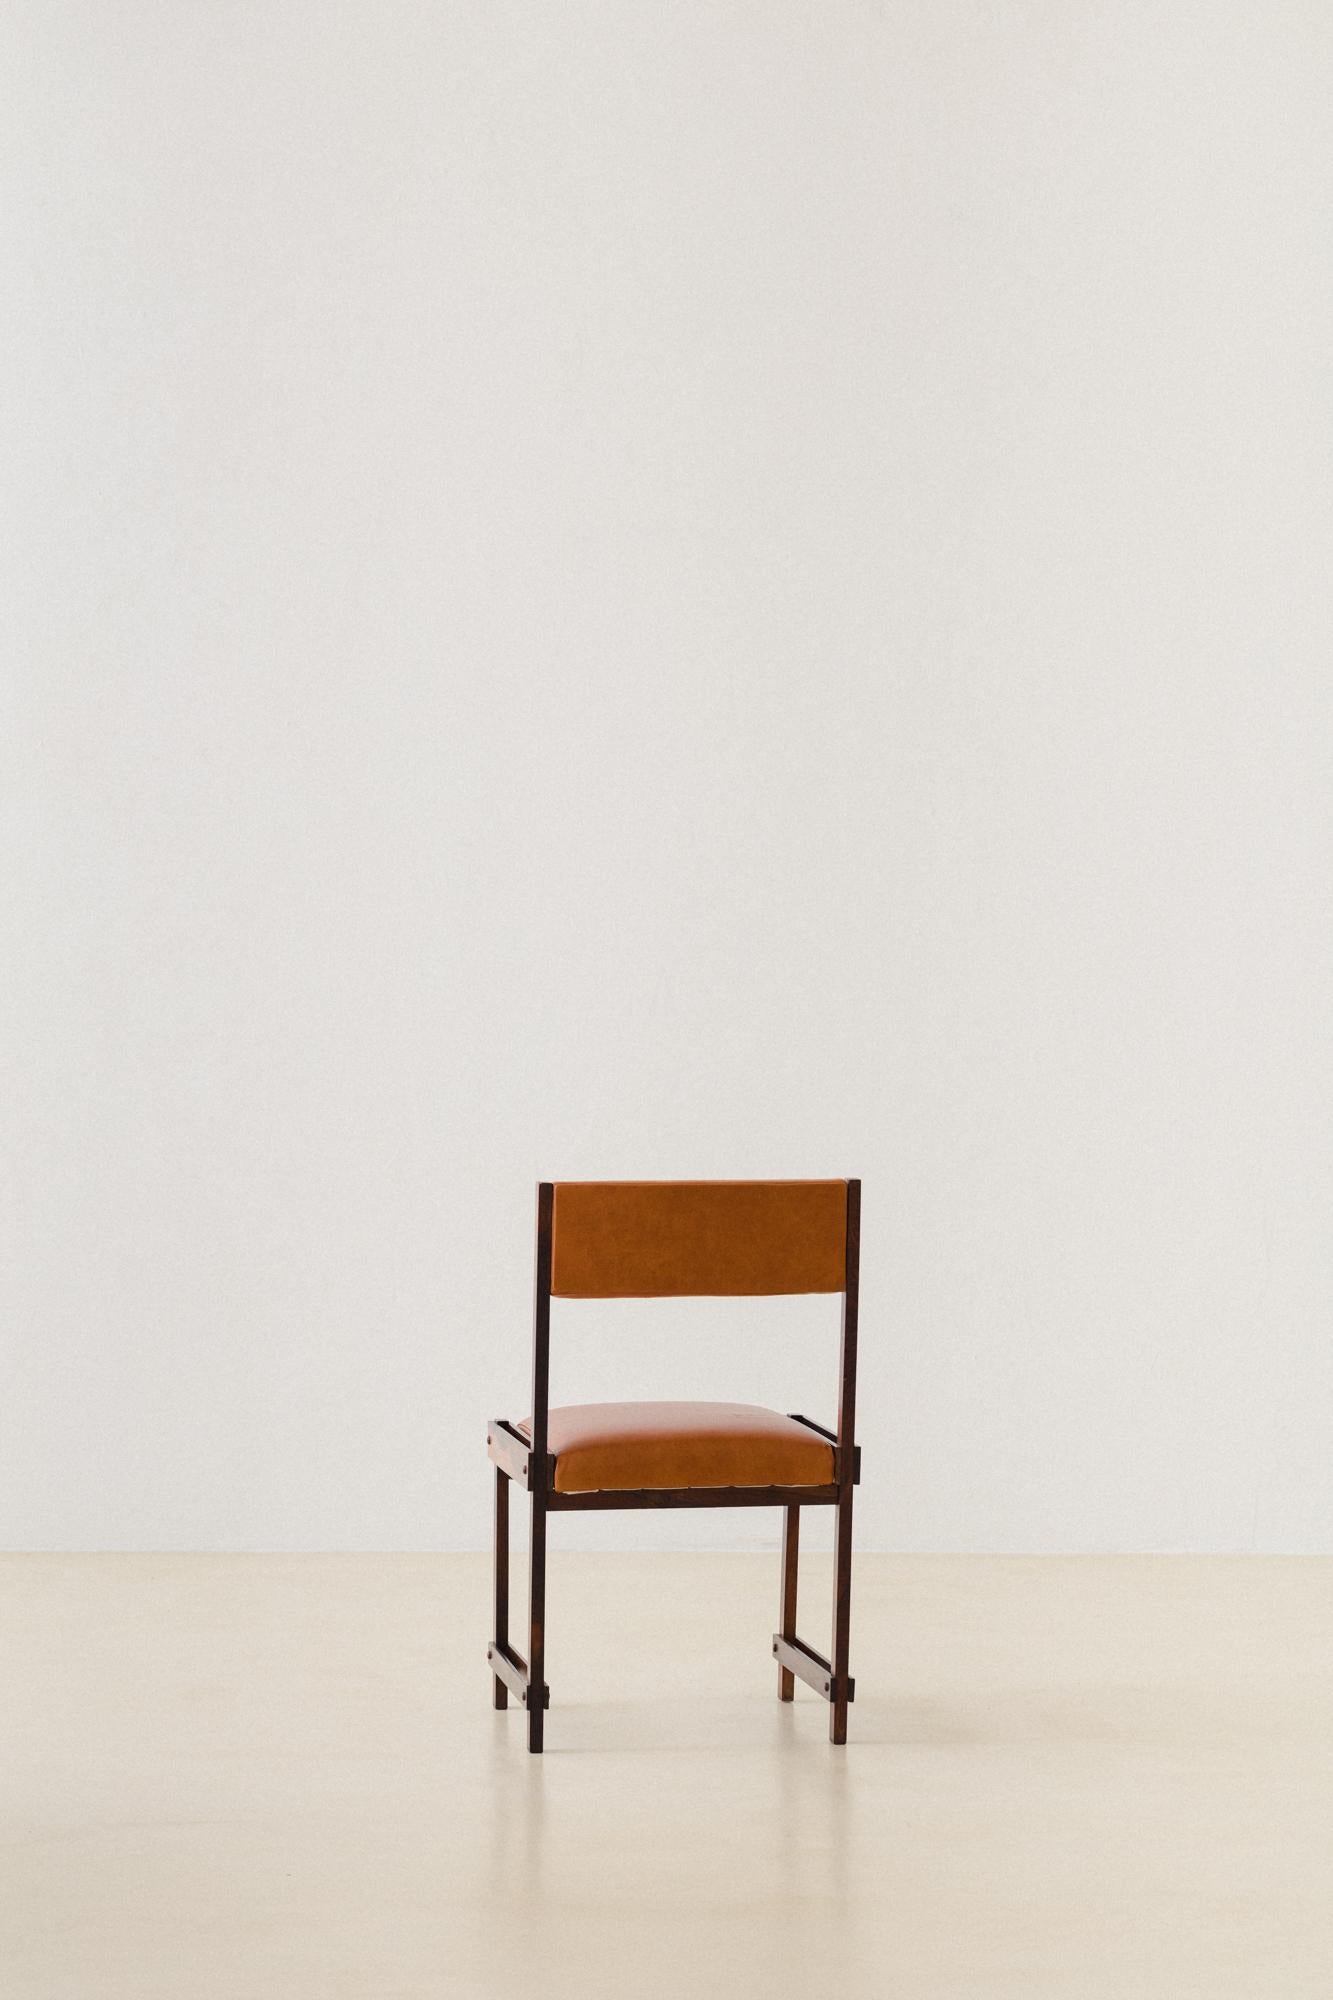 Brazilian Rosewood Dining Chairs by FAI 'Fatima Arquitetura Interiores', 1960s For Sale 4